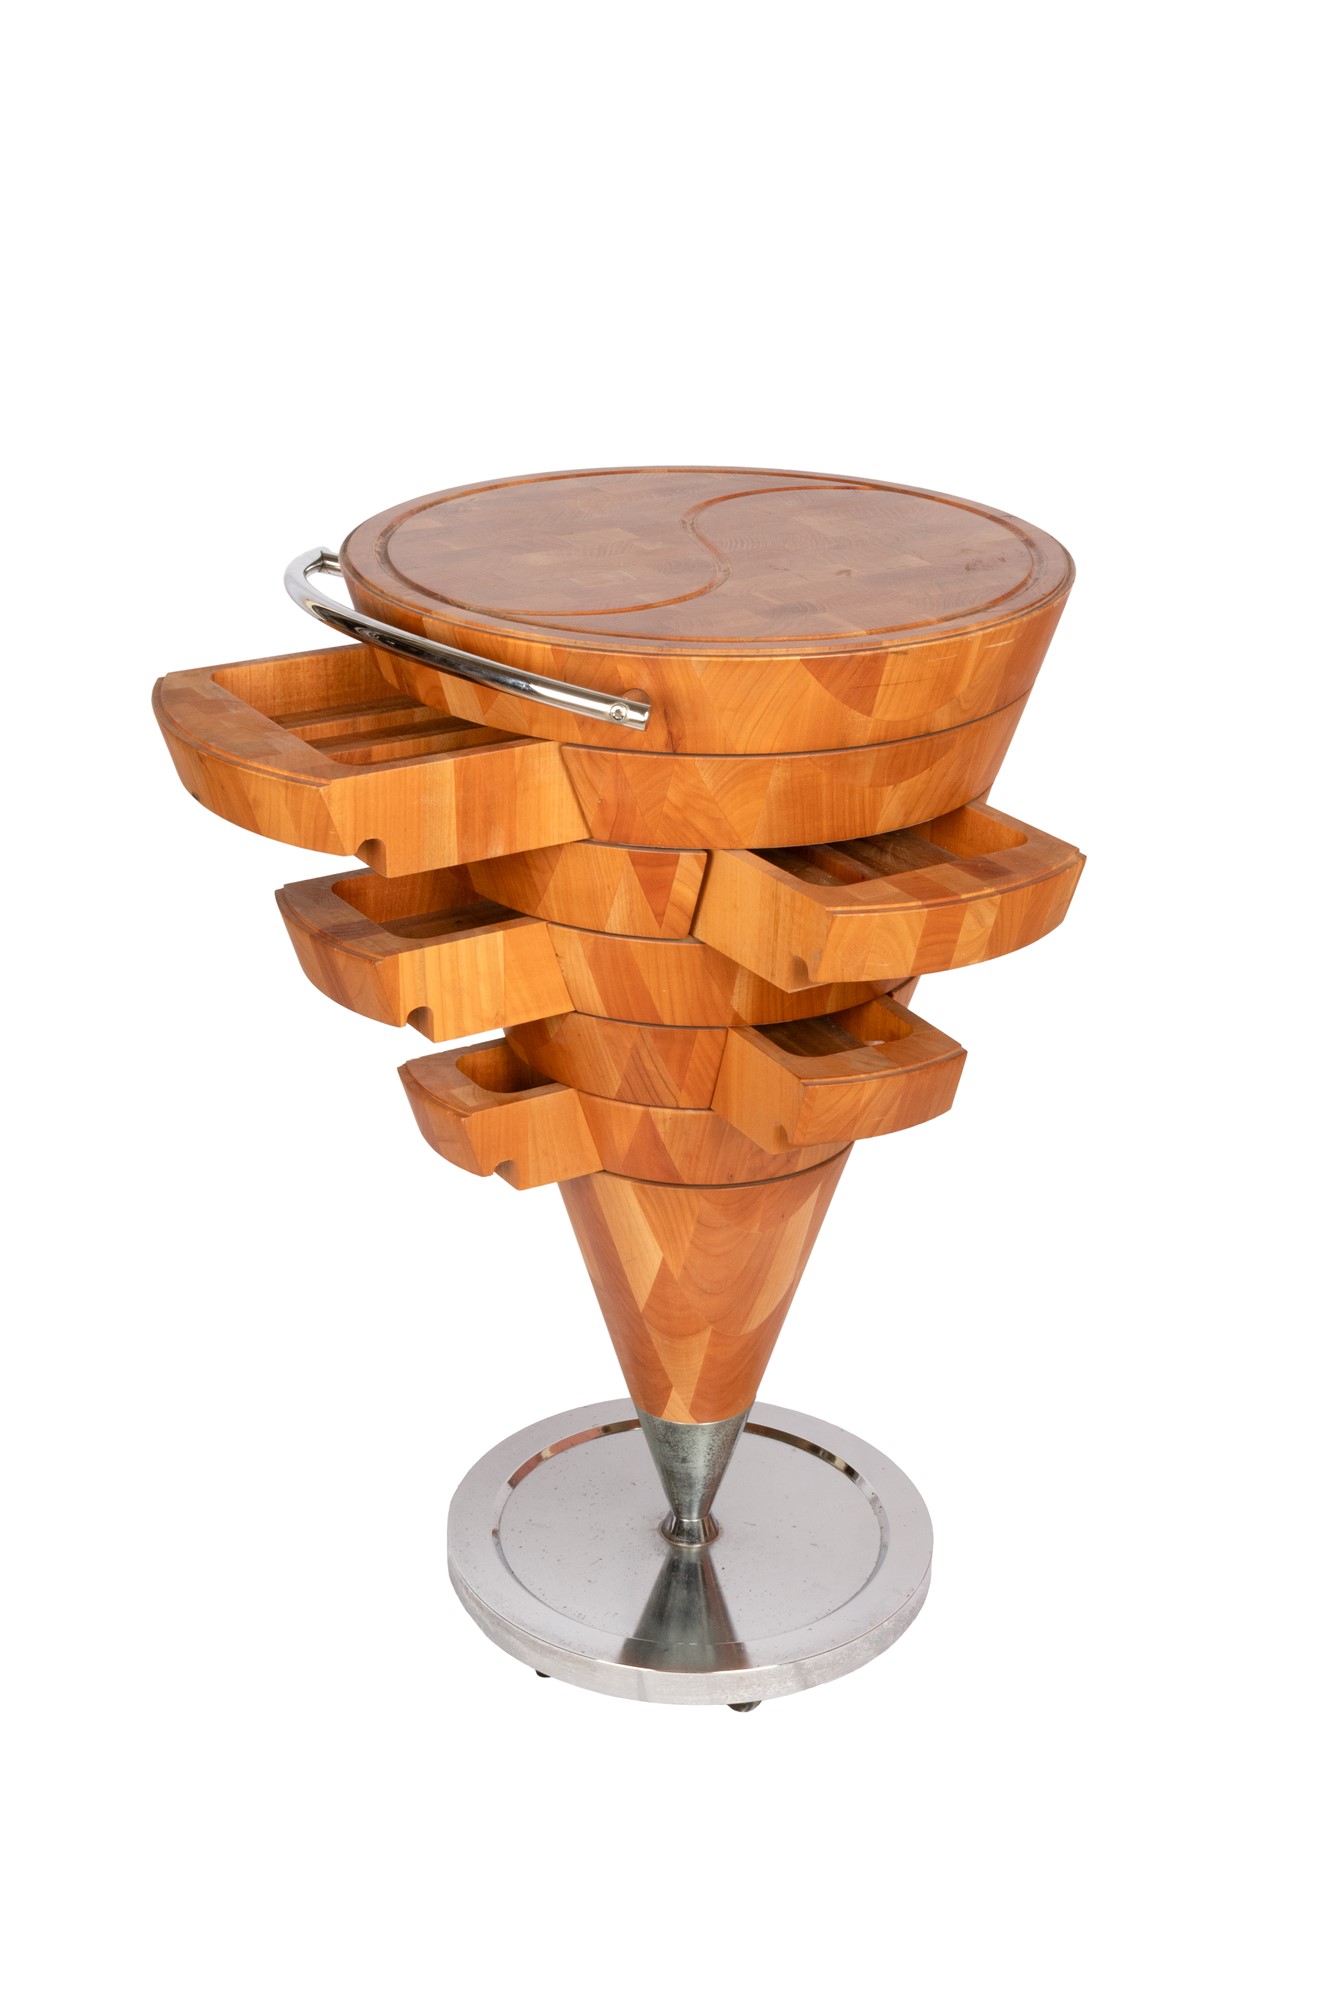 Wooden table with retractable drawers and steel base - Image 13 of 23